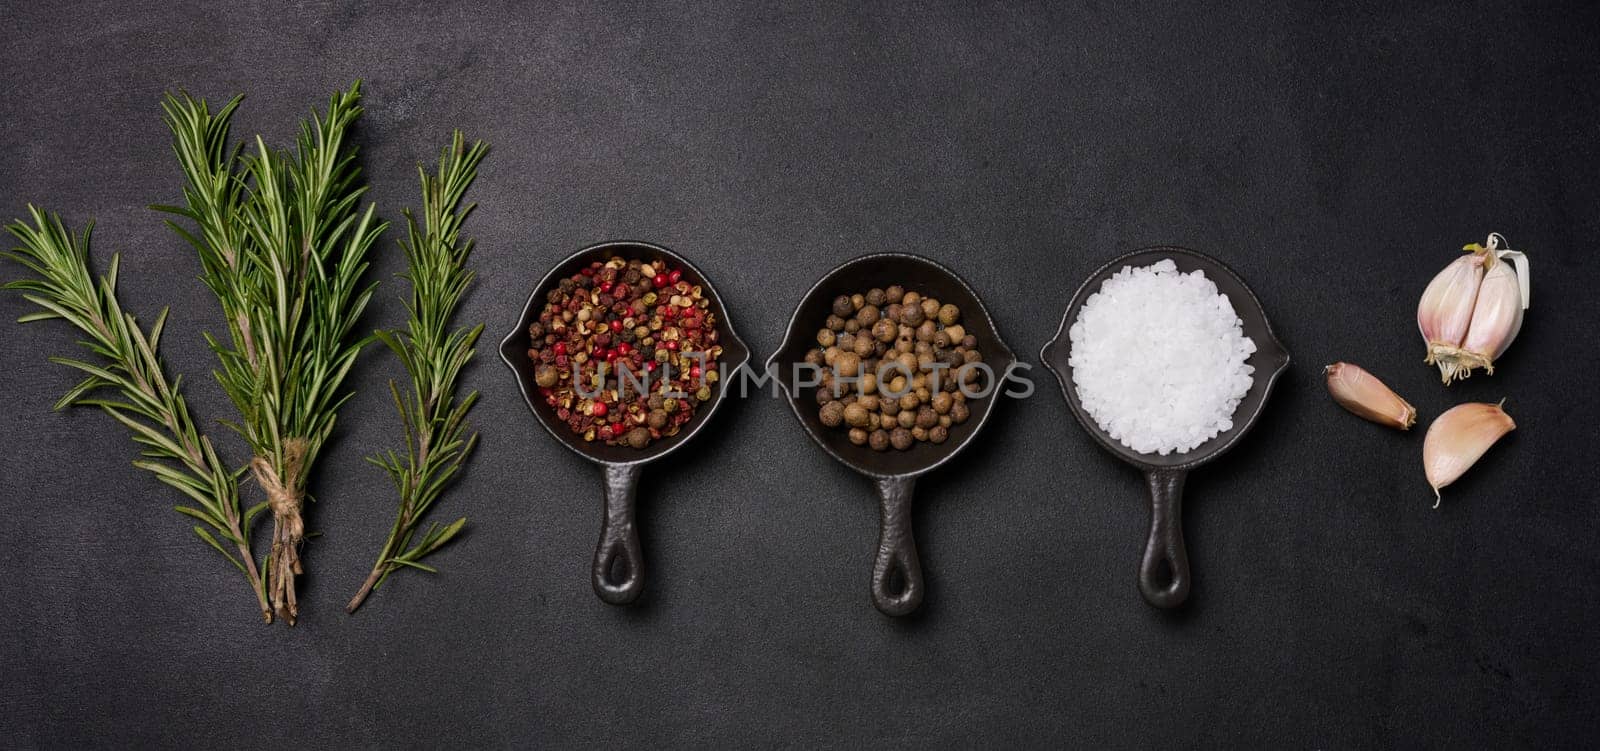 Miniature pans with spices, salt, black pepper and fragrant pepper, a sprig of rosemary on a black table. Spices for cooking by ndanko